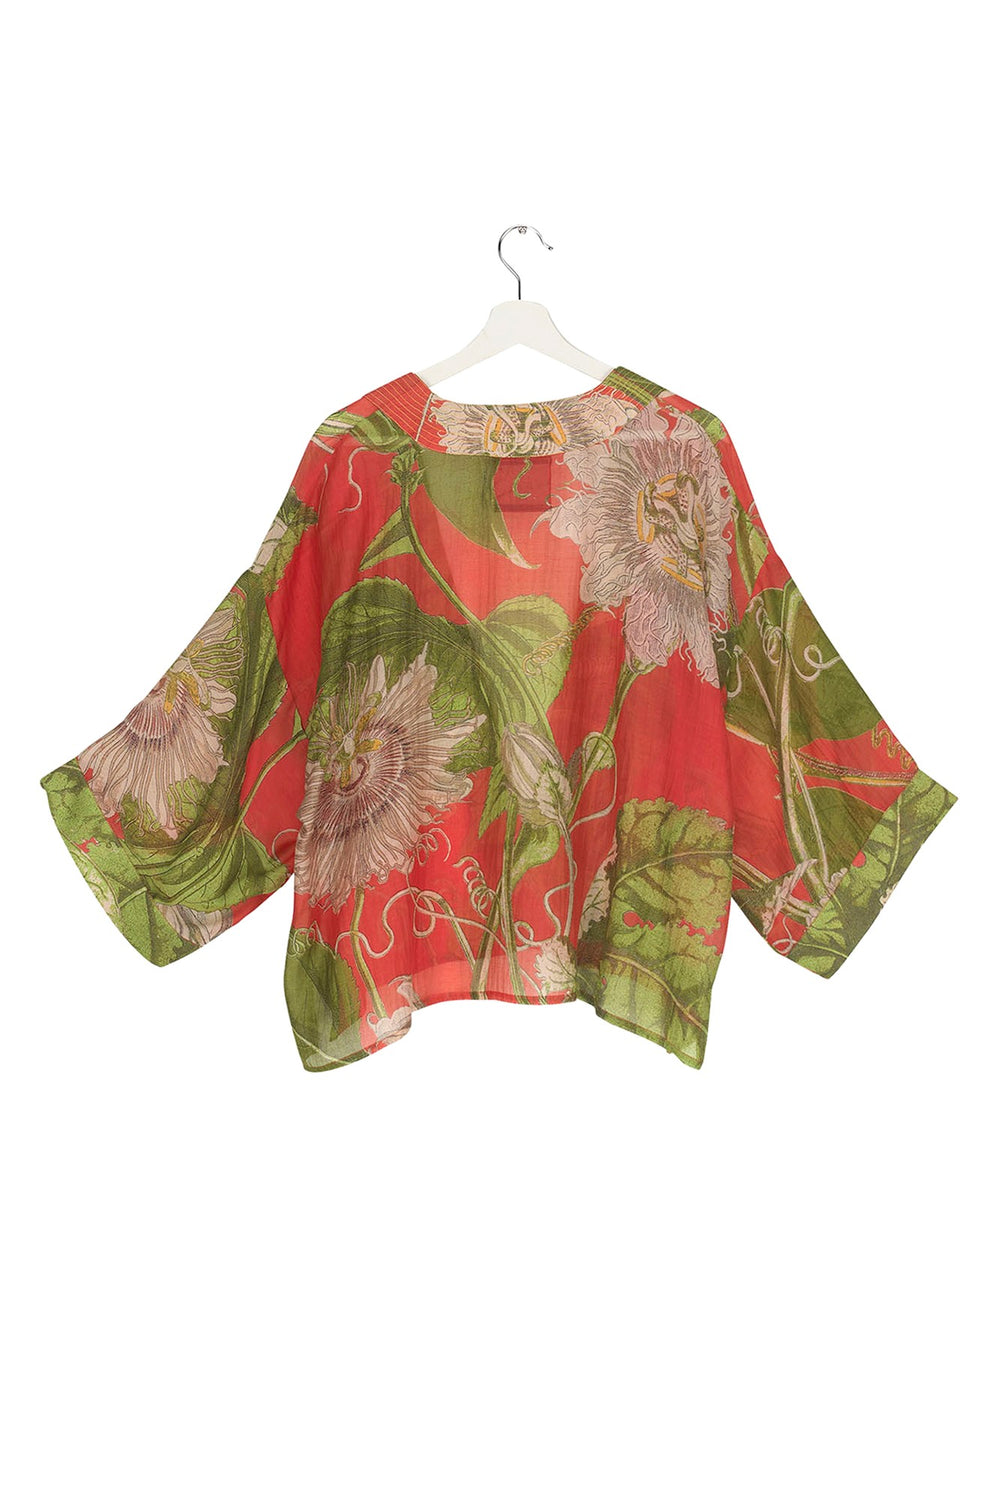 Passion Flower or 'Passiflora' mini kimono jacket in scarlet red by One Hundred Stars in Collaboration with Kew, Royal Botanic Gardens. 